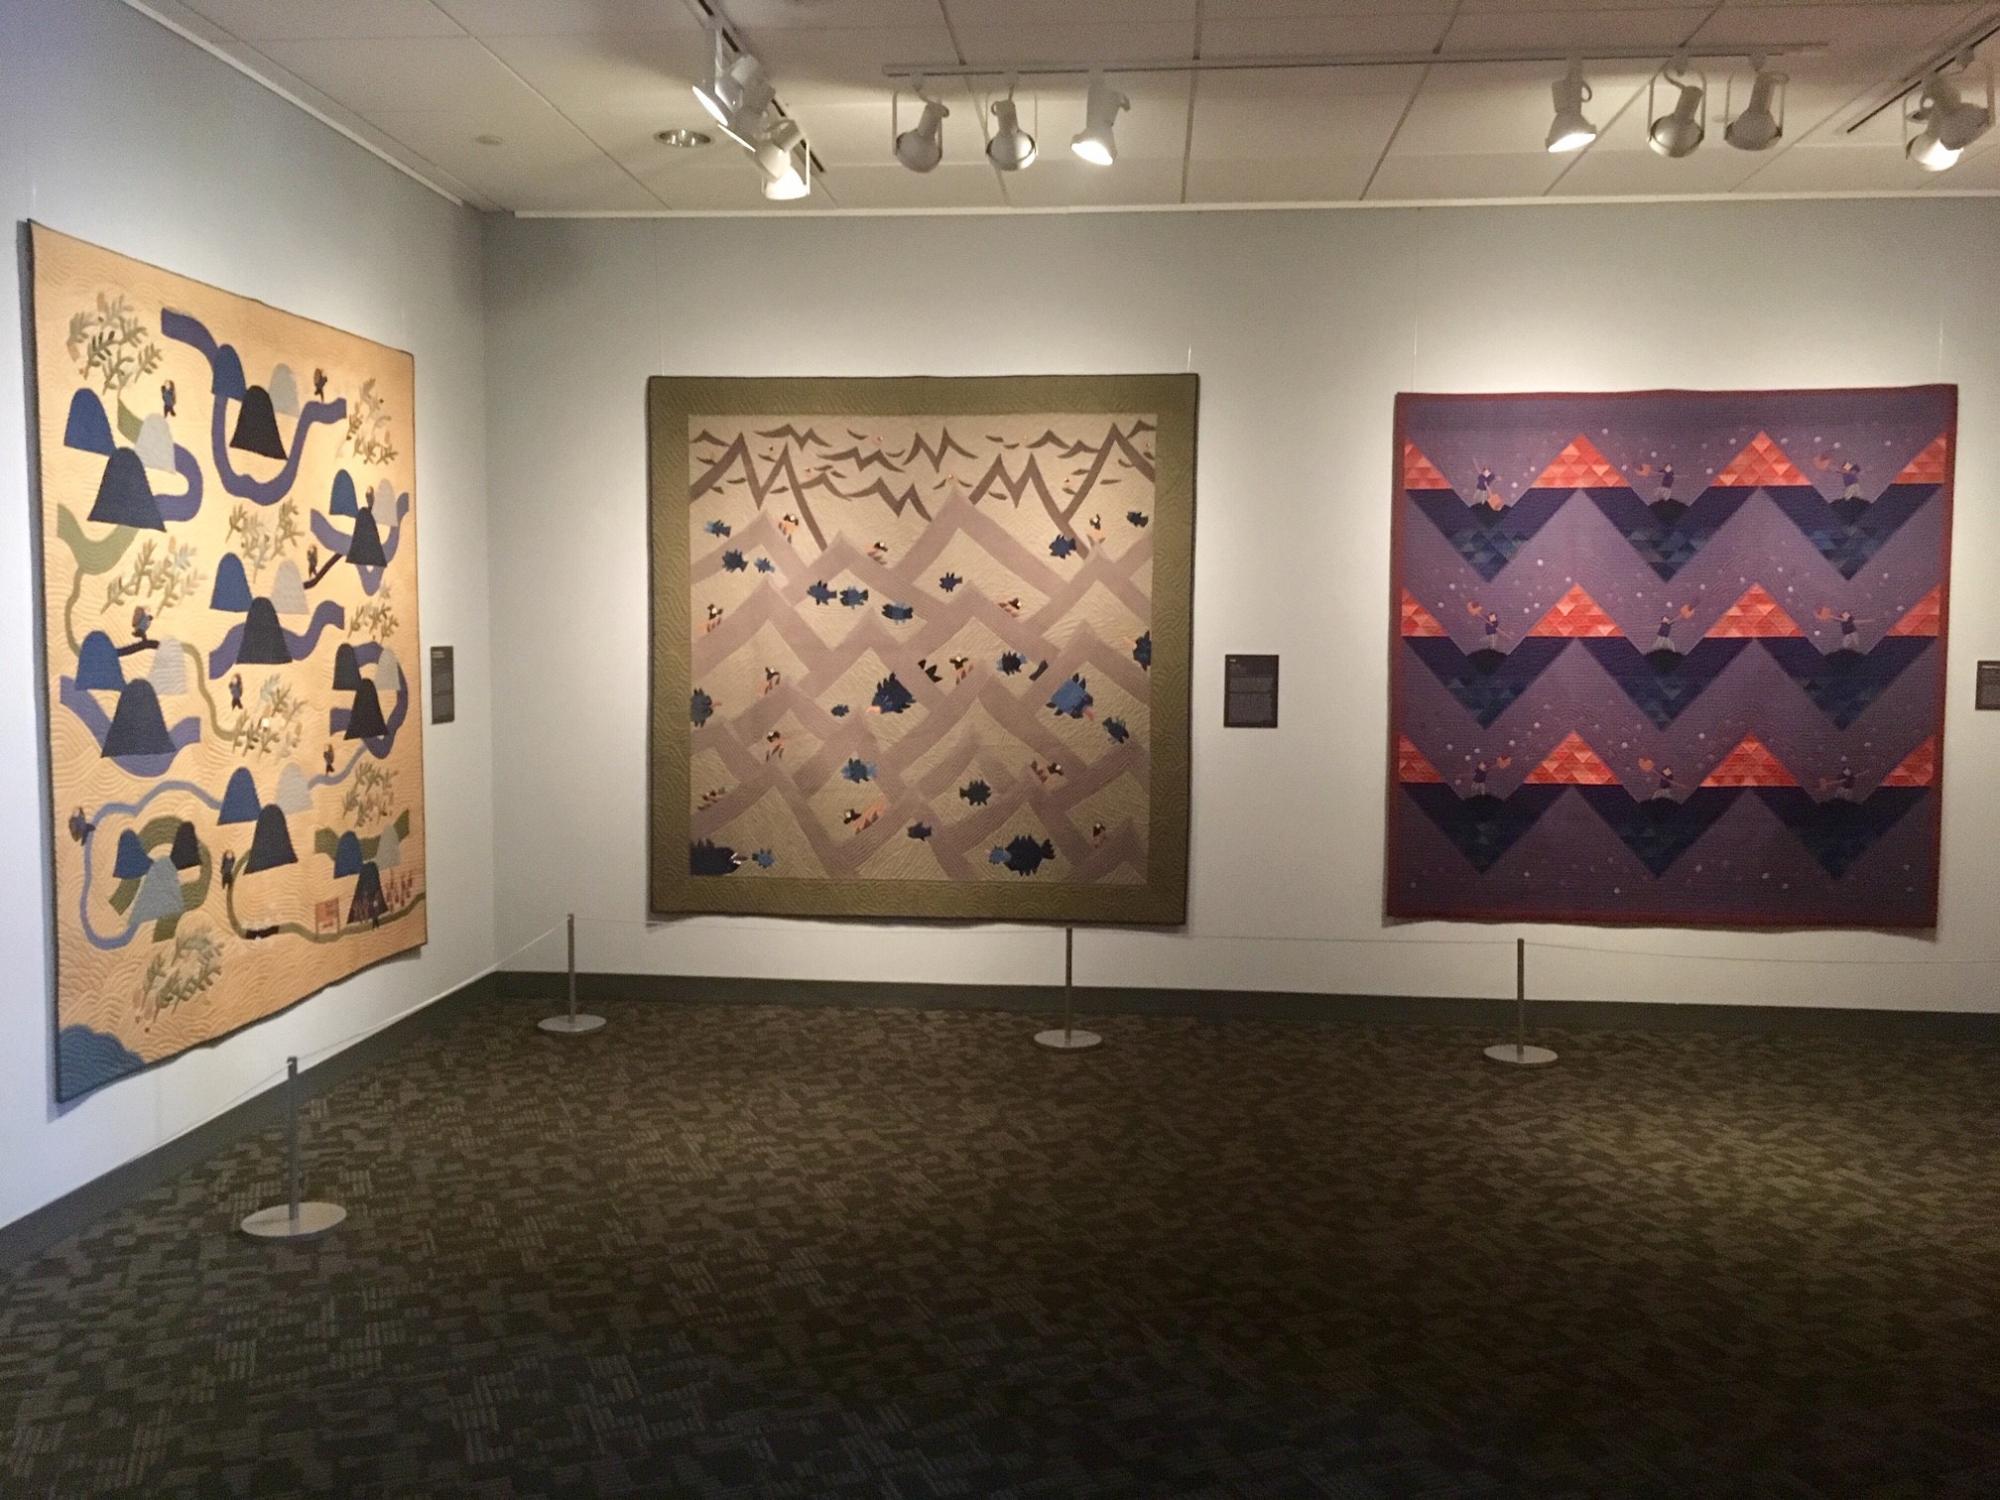 Three Rumi O'Brien quilts on display in a gallery.